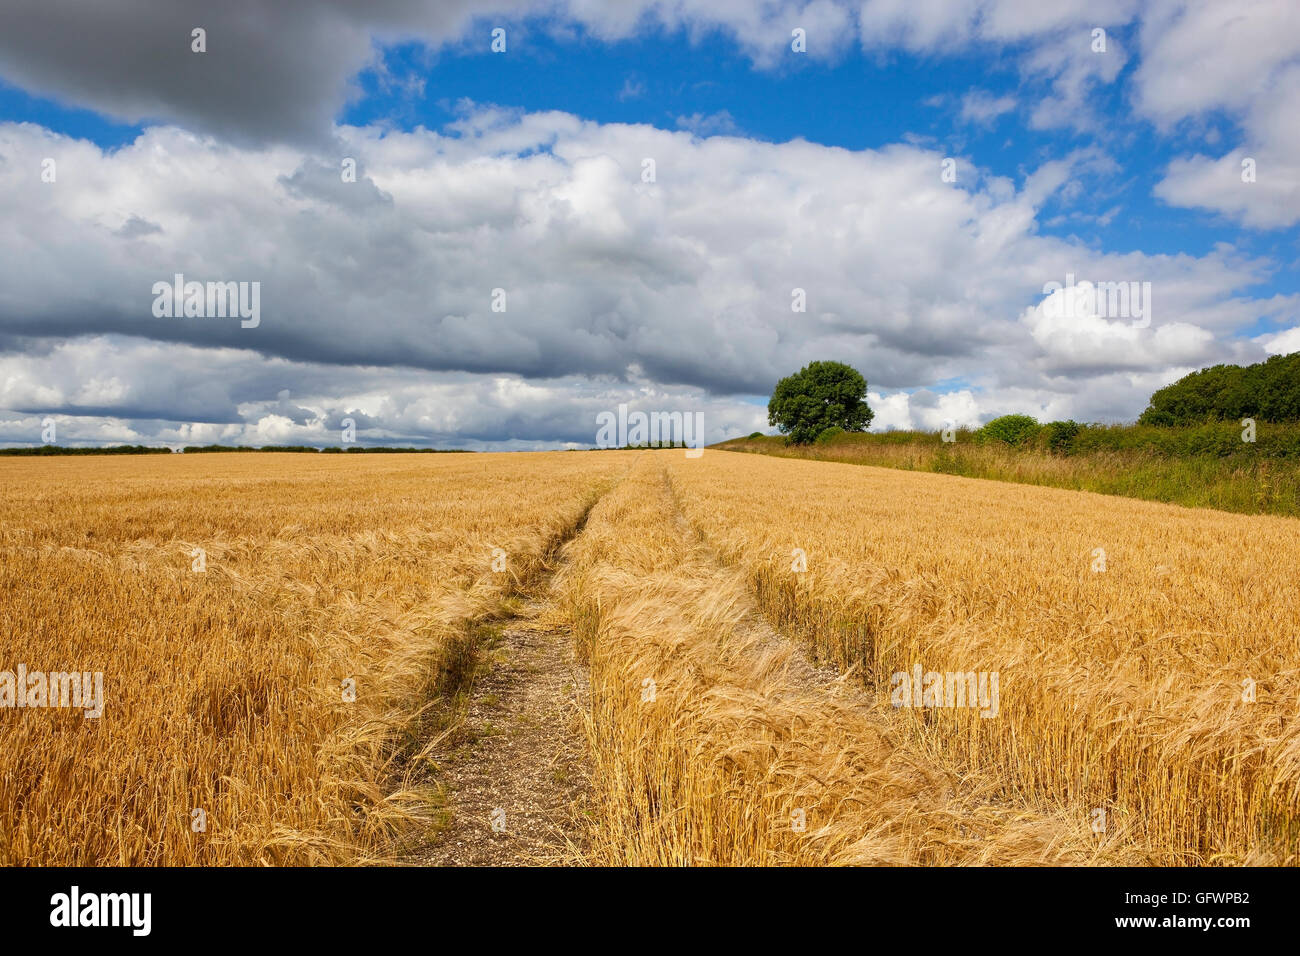 A golden barley field at harvest time in the Yorkshire wolds under a blue cloudy sky in summertime. Stock Photo